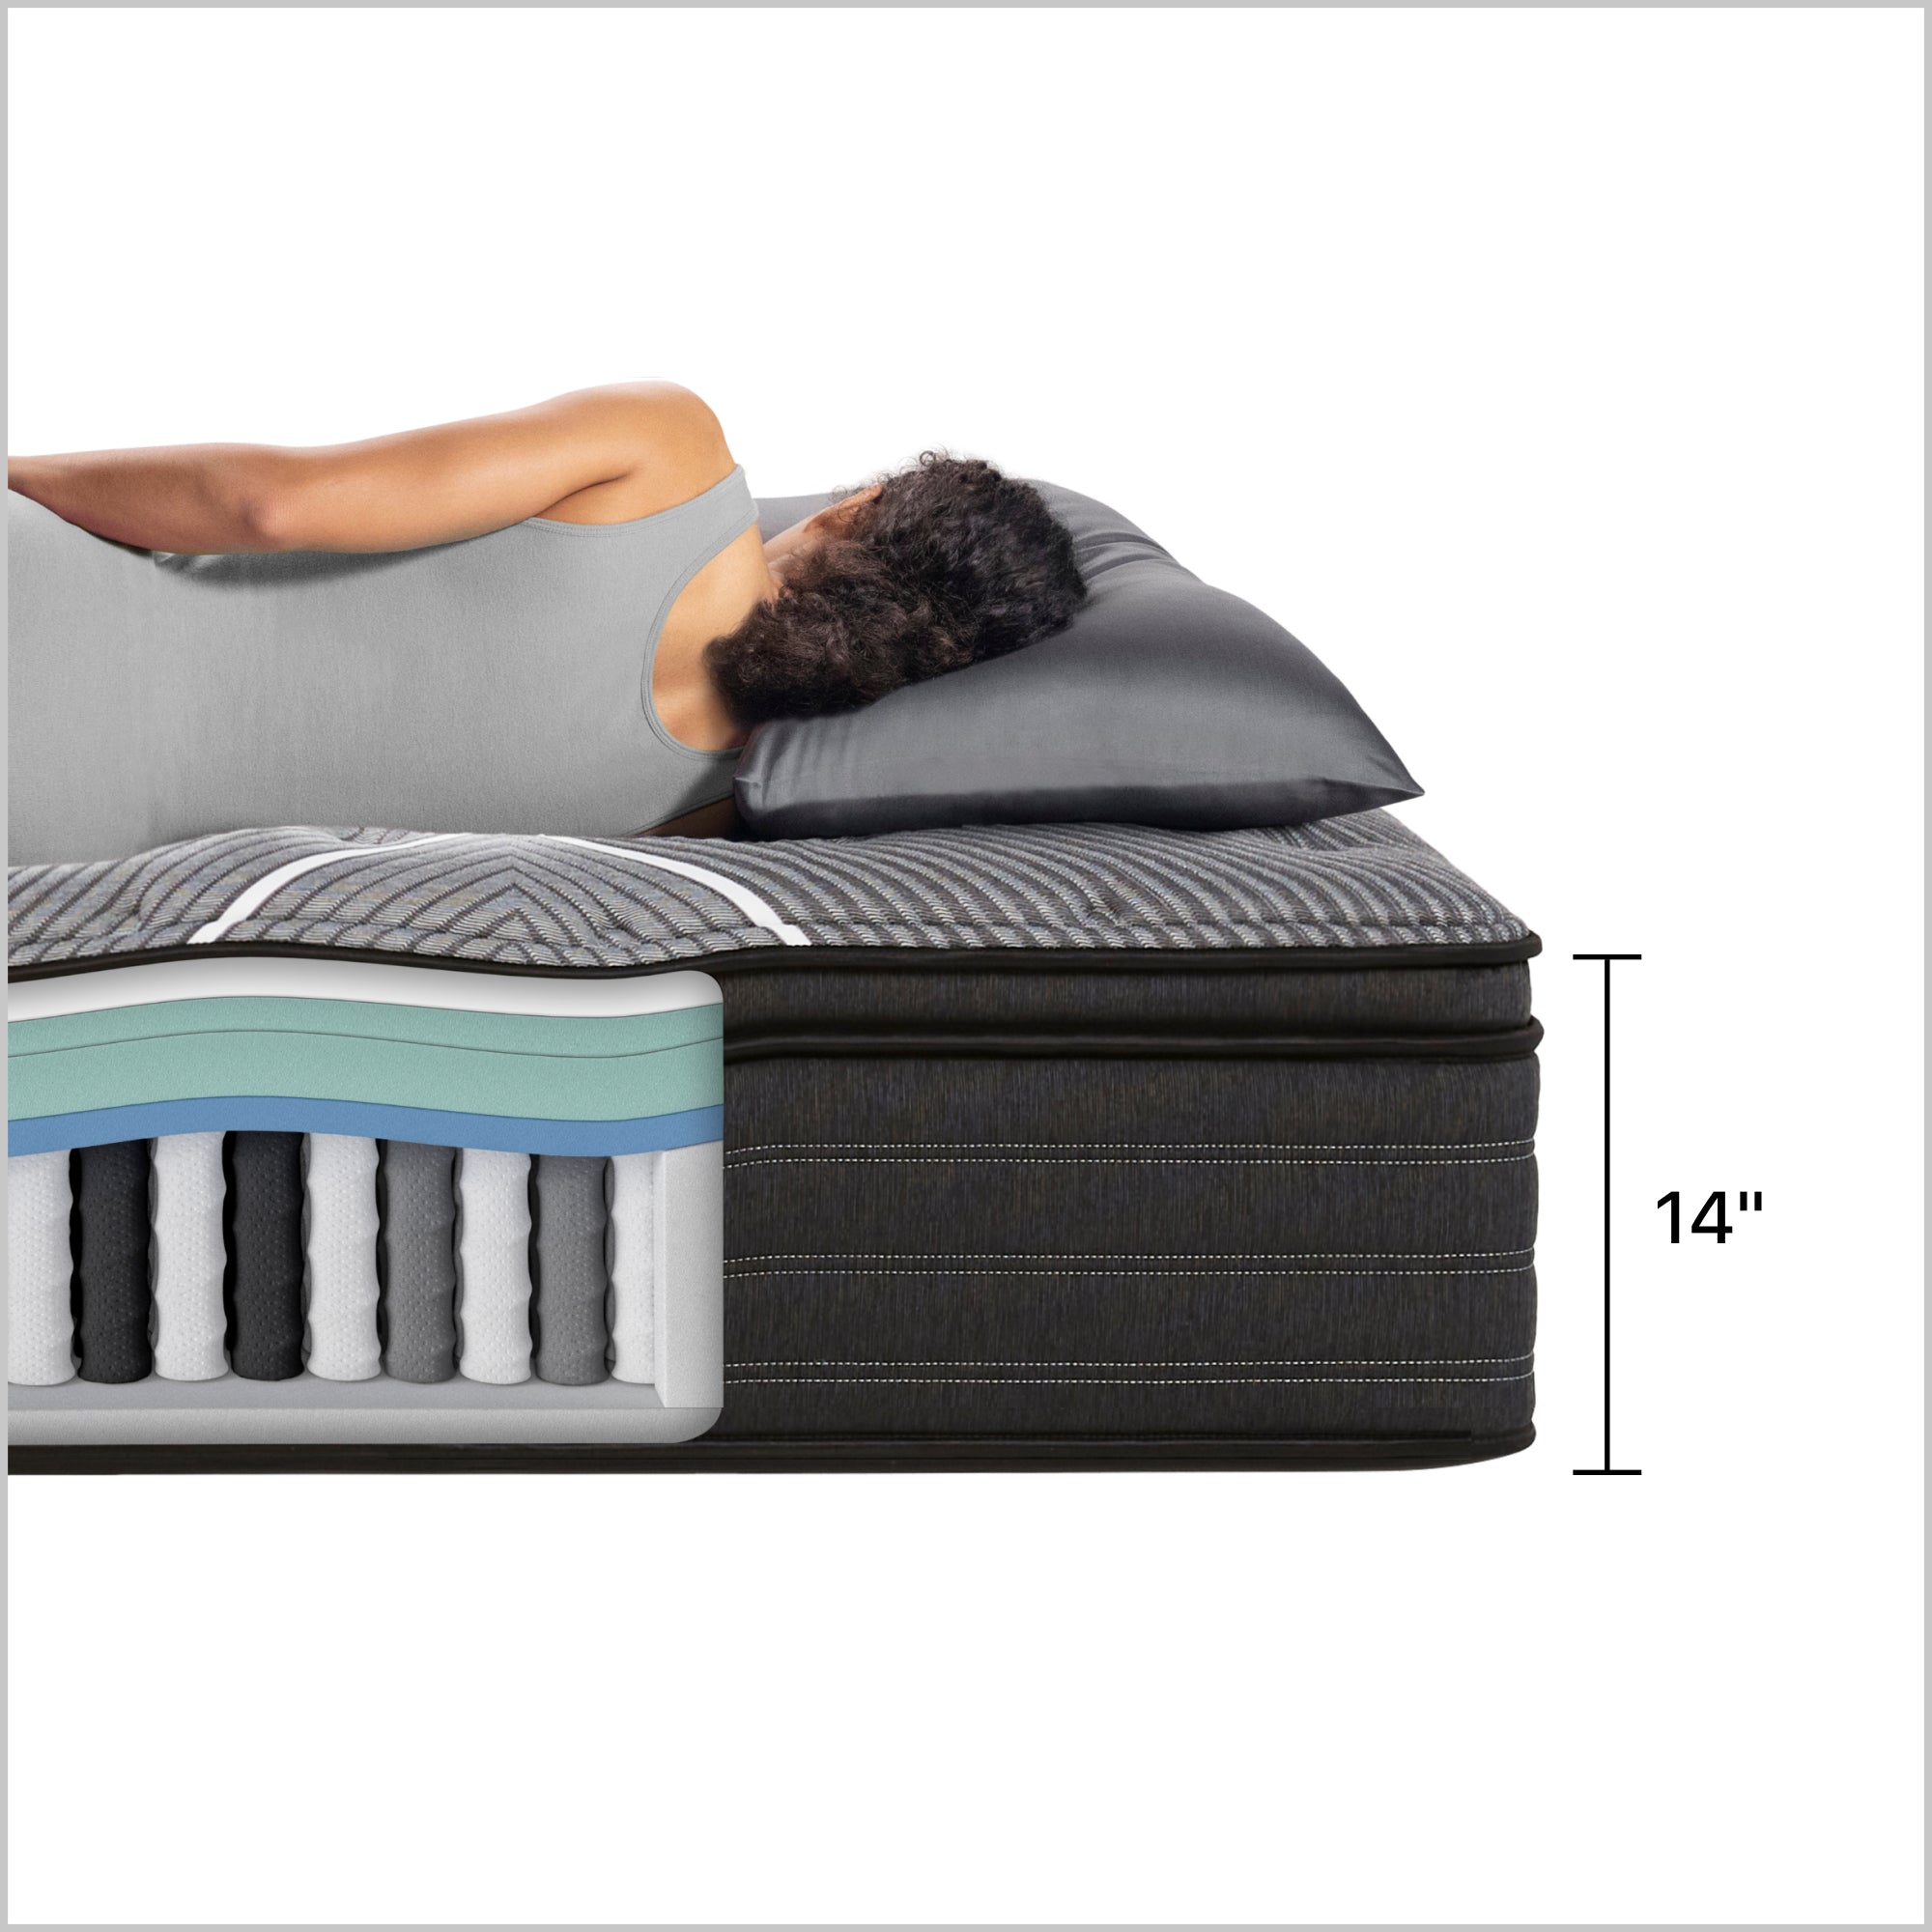 Diagram of the materials used in the Beautyrest Black b-class mattress || series: grand b-class || feel: plush pillow top